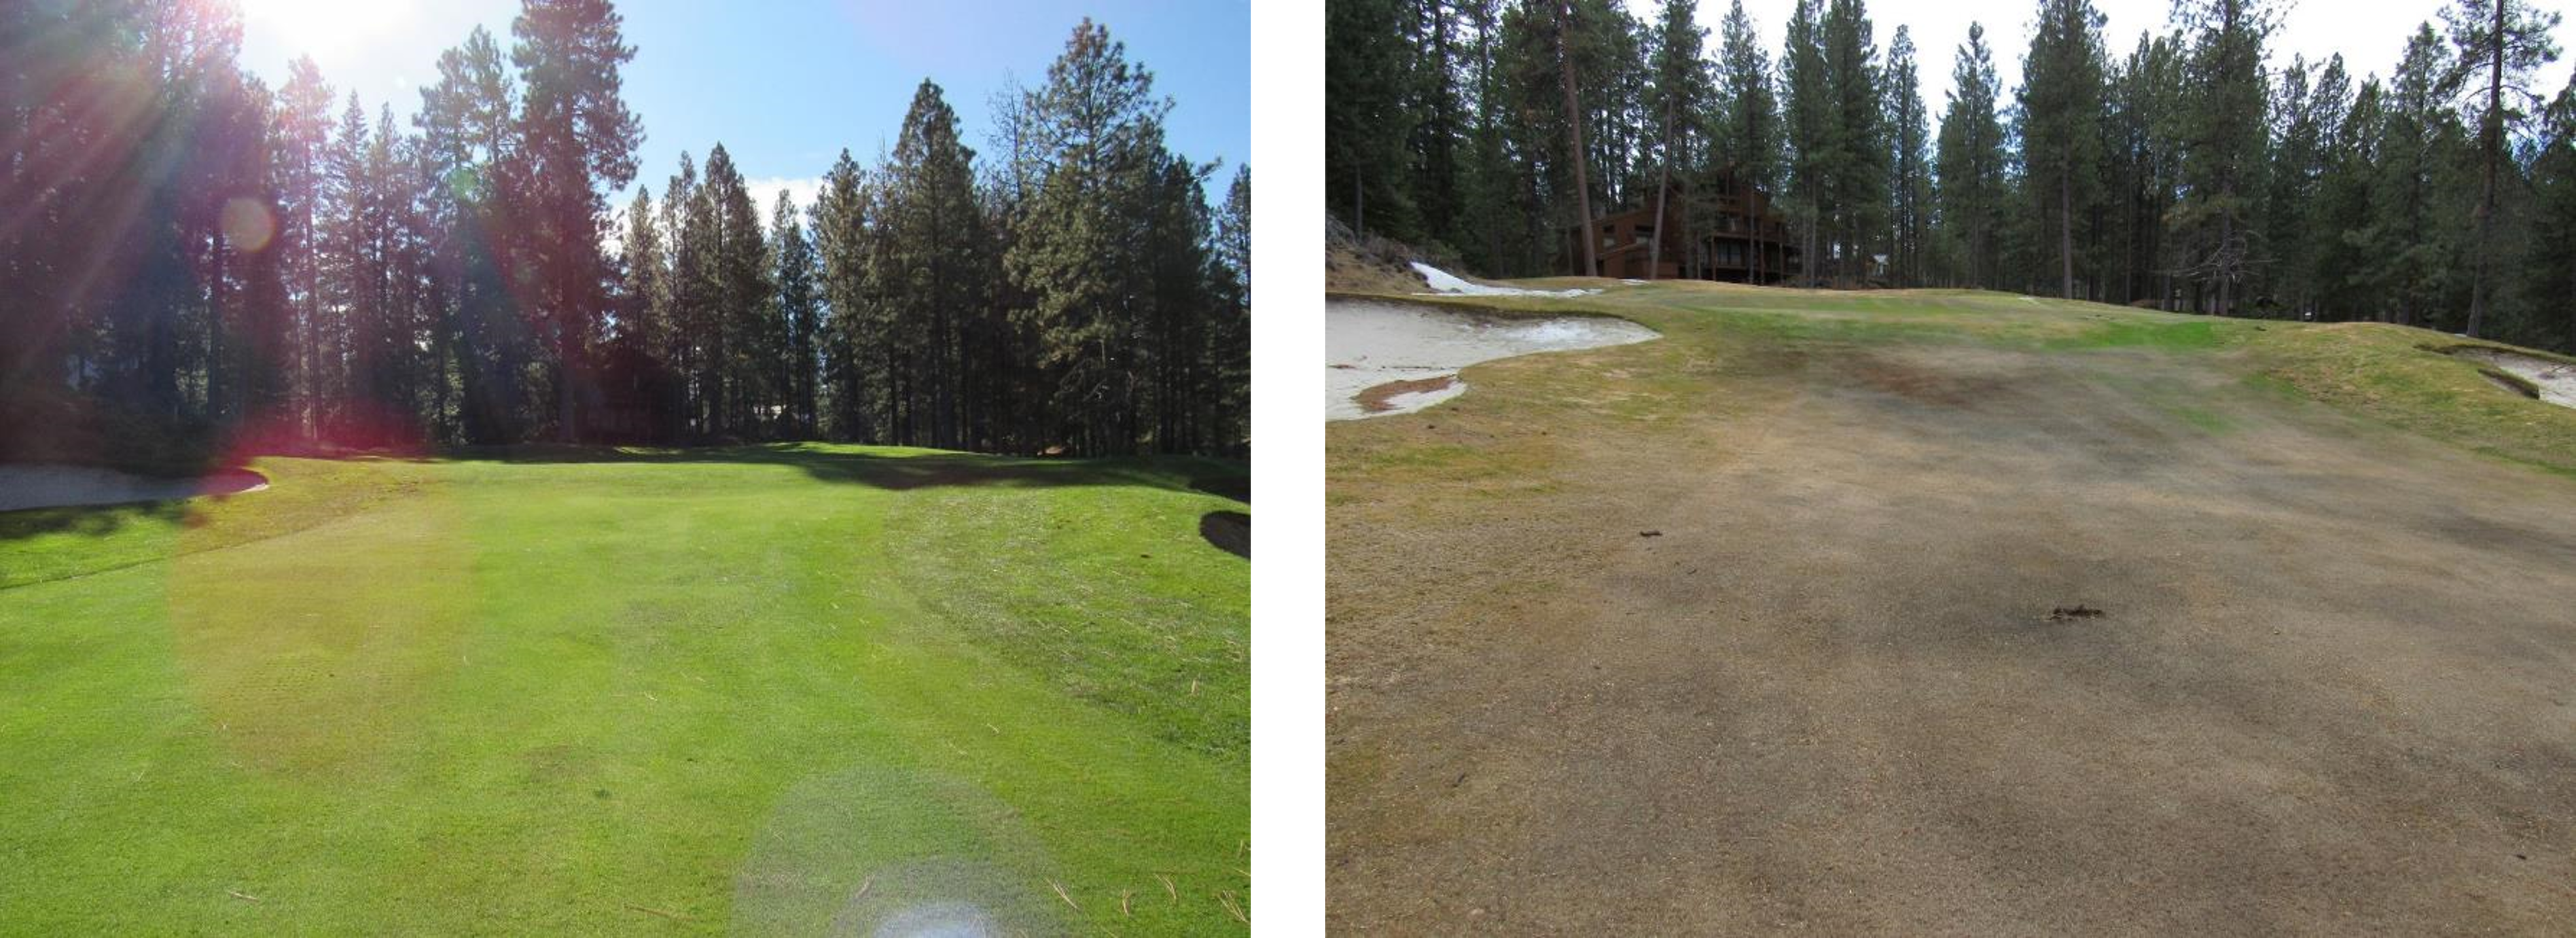 a before winter and after winter comparison of a golf course hole